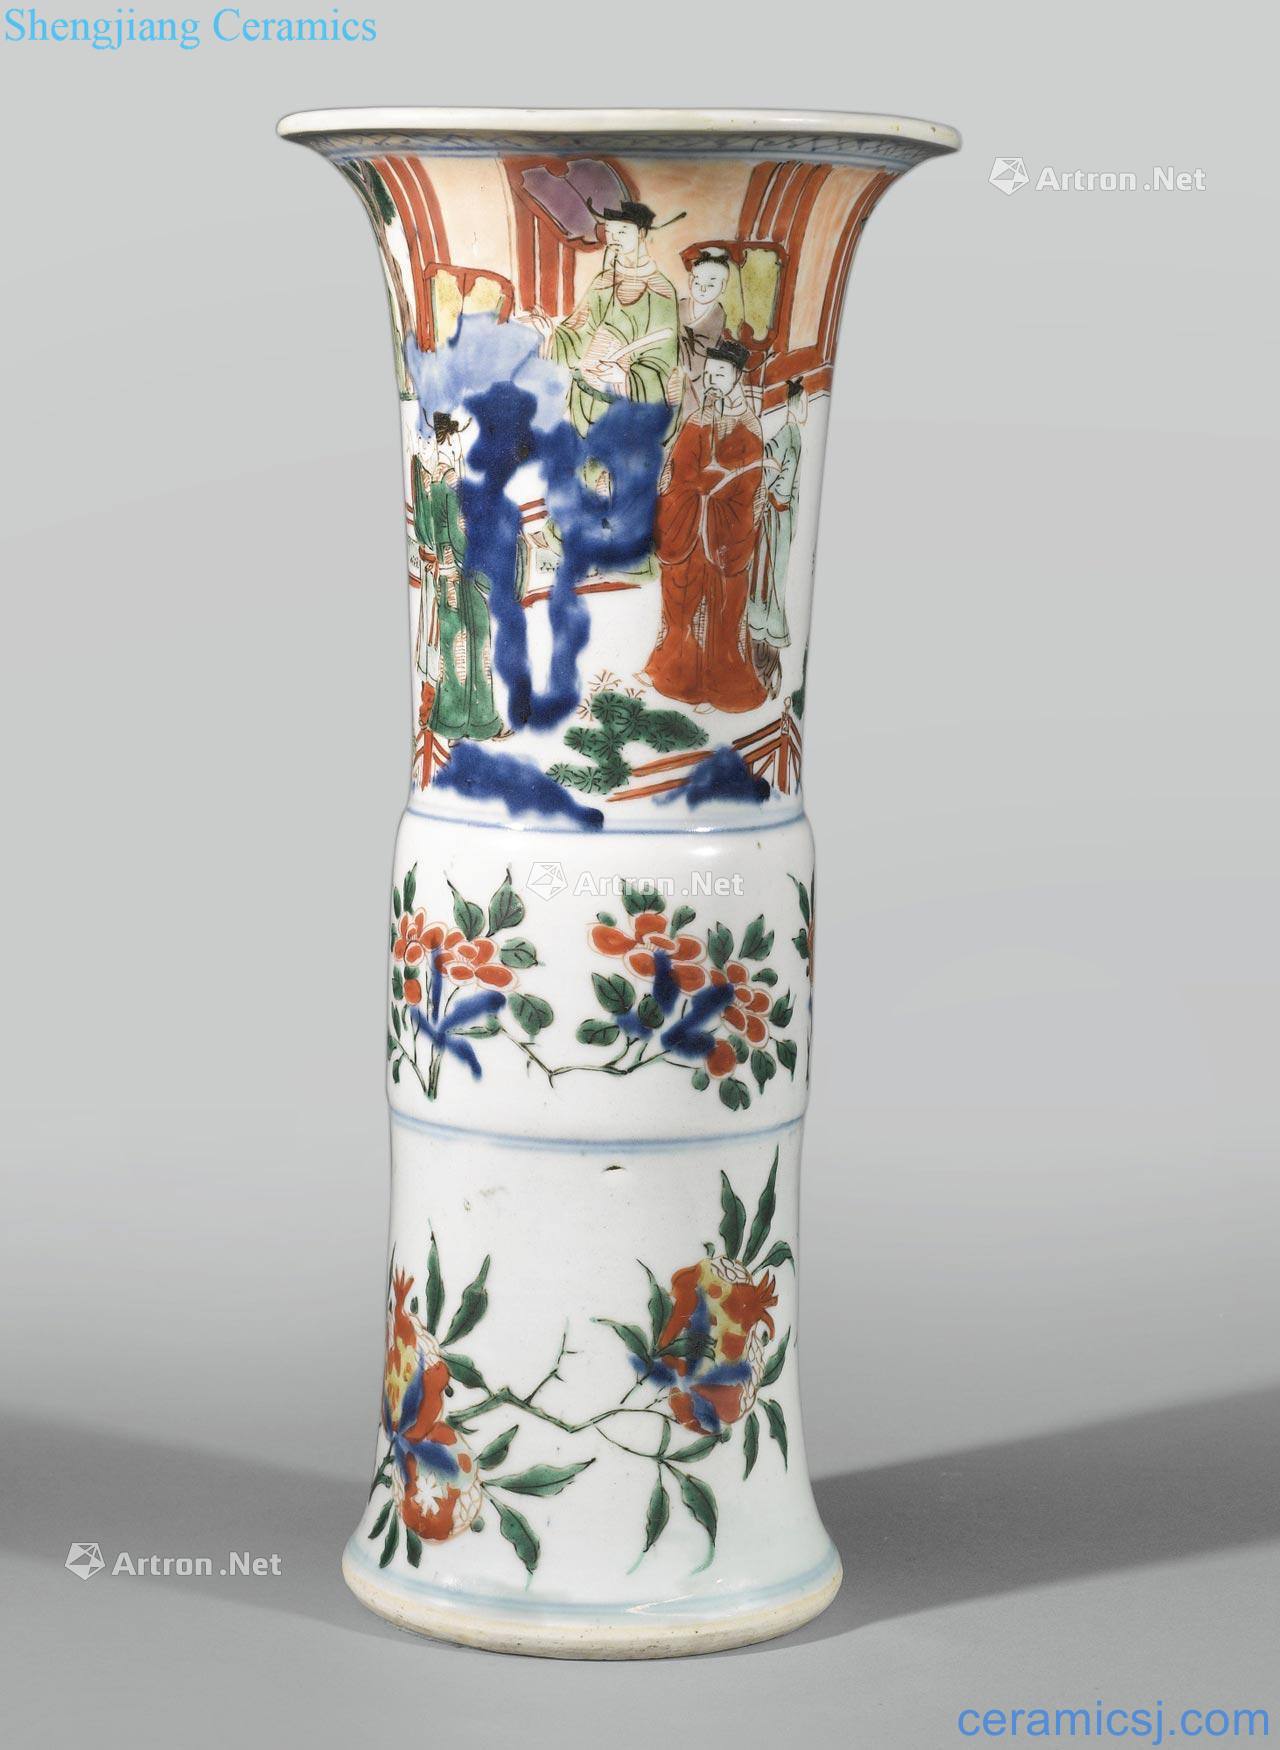 In the 17th century Figure flower vase with colorful up high